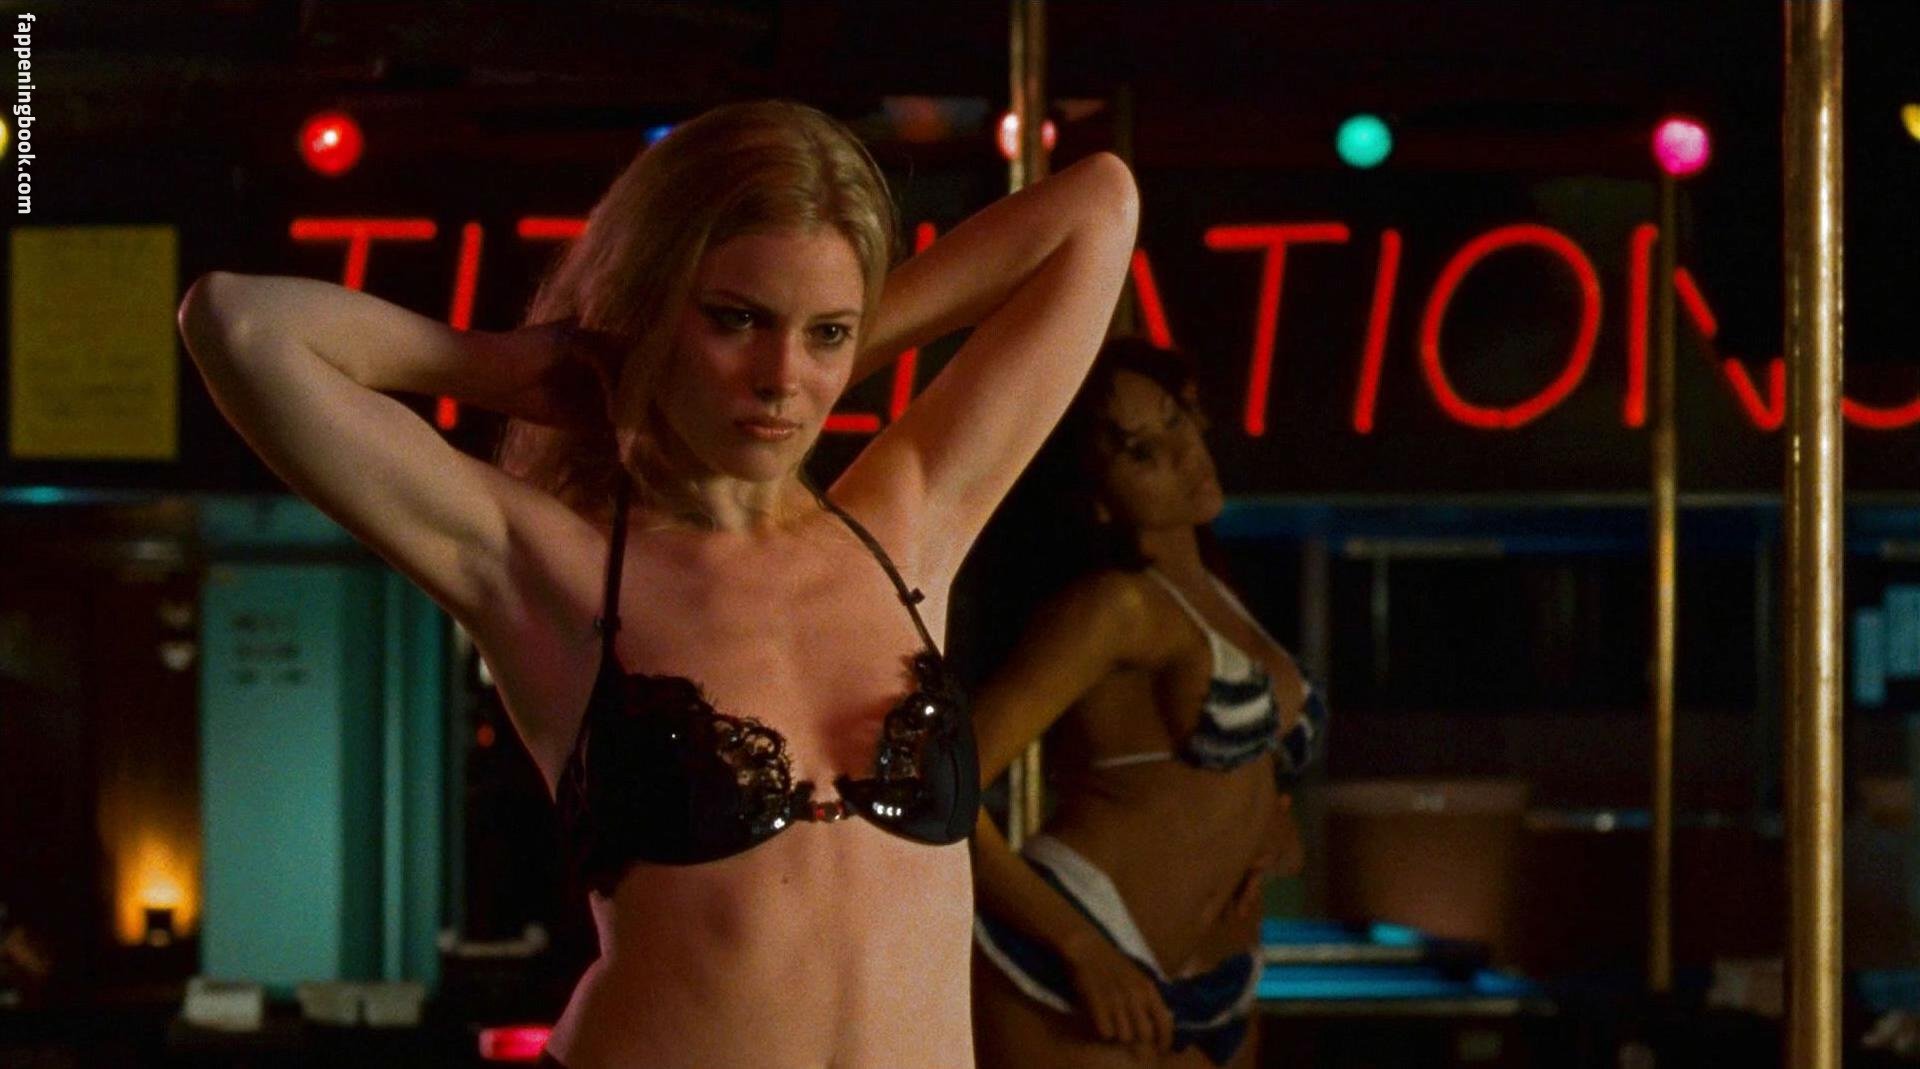 Gillian Jacobs Nude, The Fappening - Photo #200495 - FappeningBook.